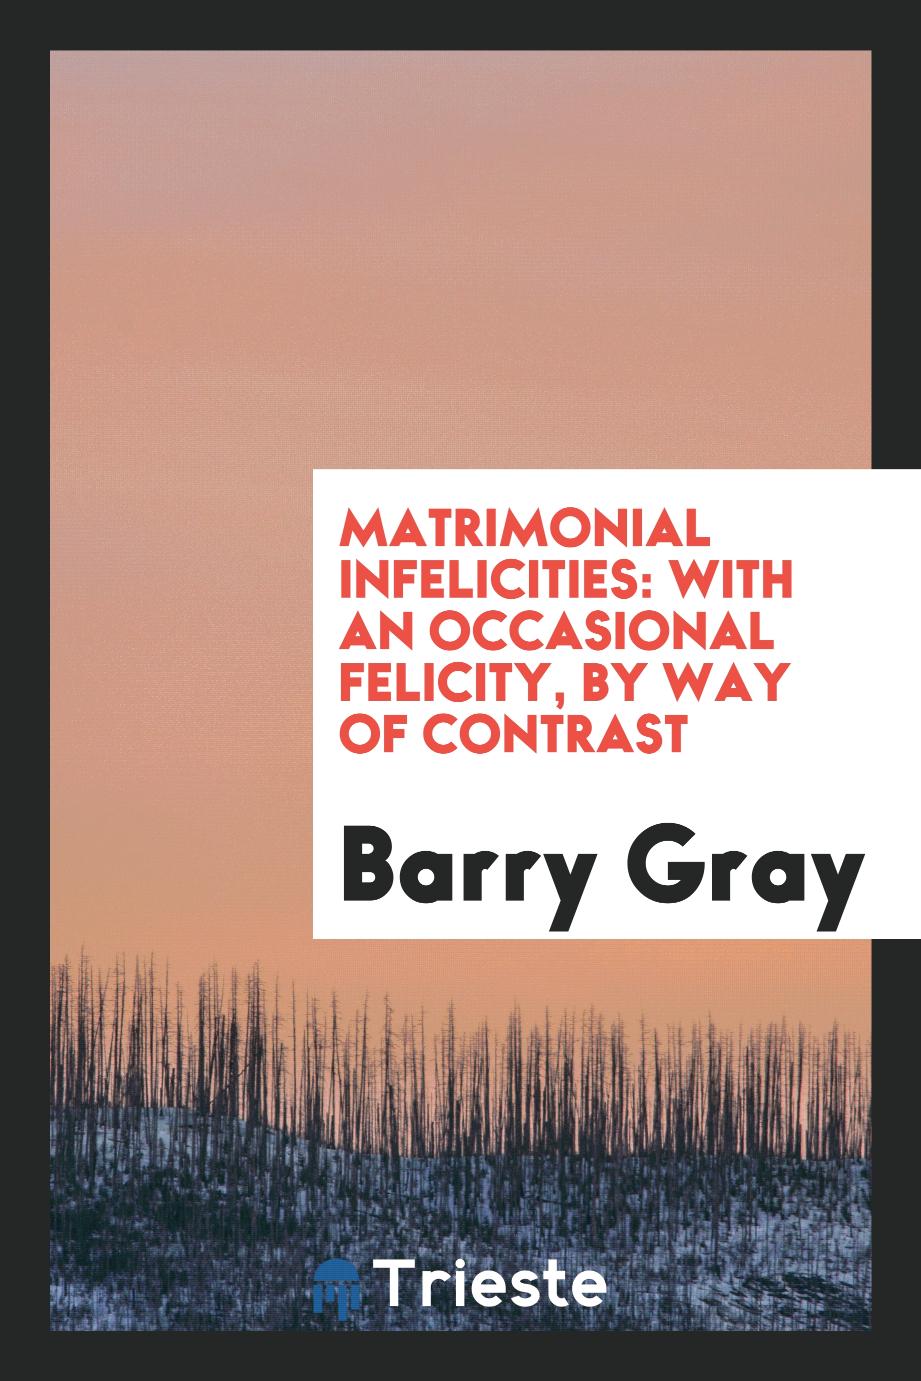 Matrimonial infelicities: with an occasional felicity, by way of contrast